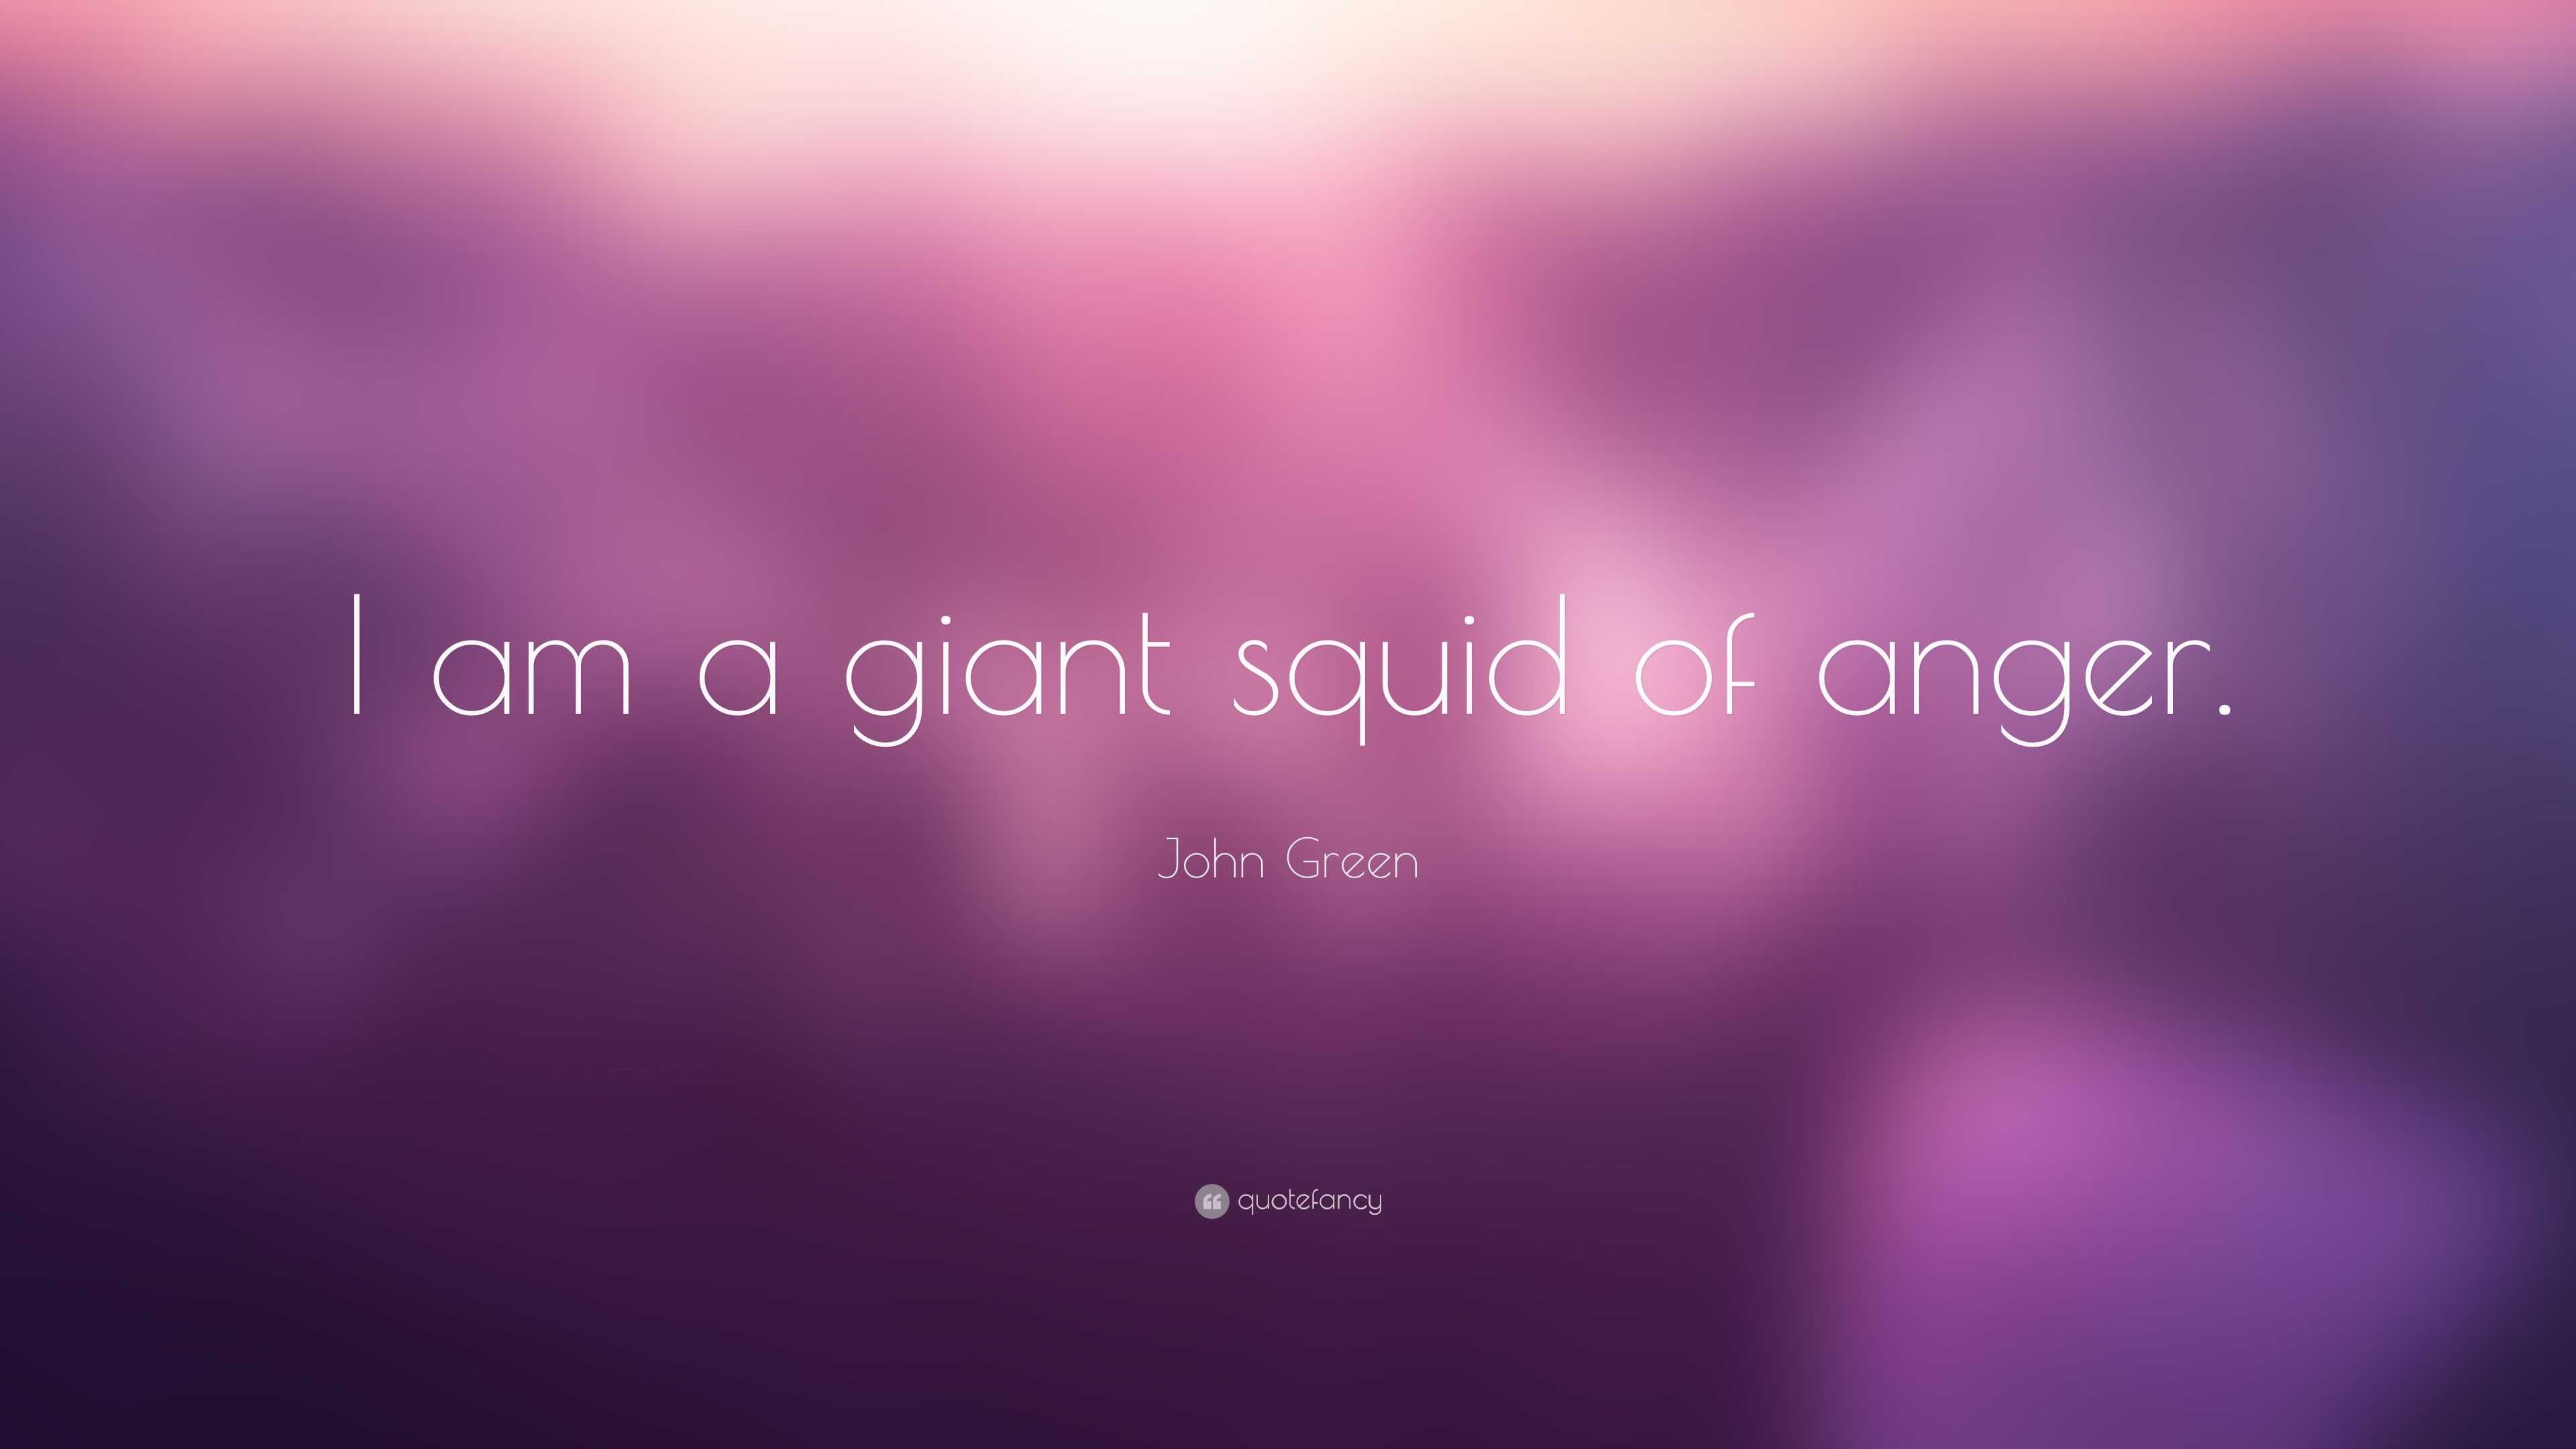 John Green Quote: “I am a giant squid of anger.”